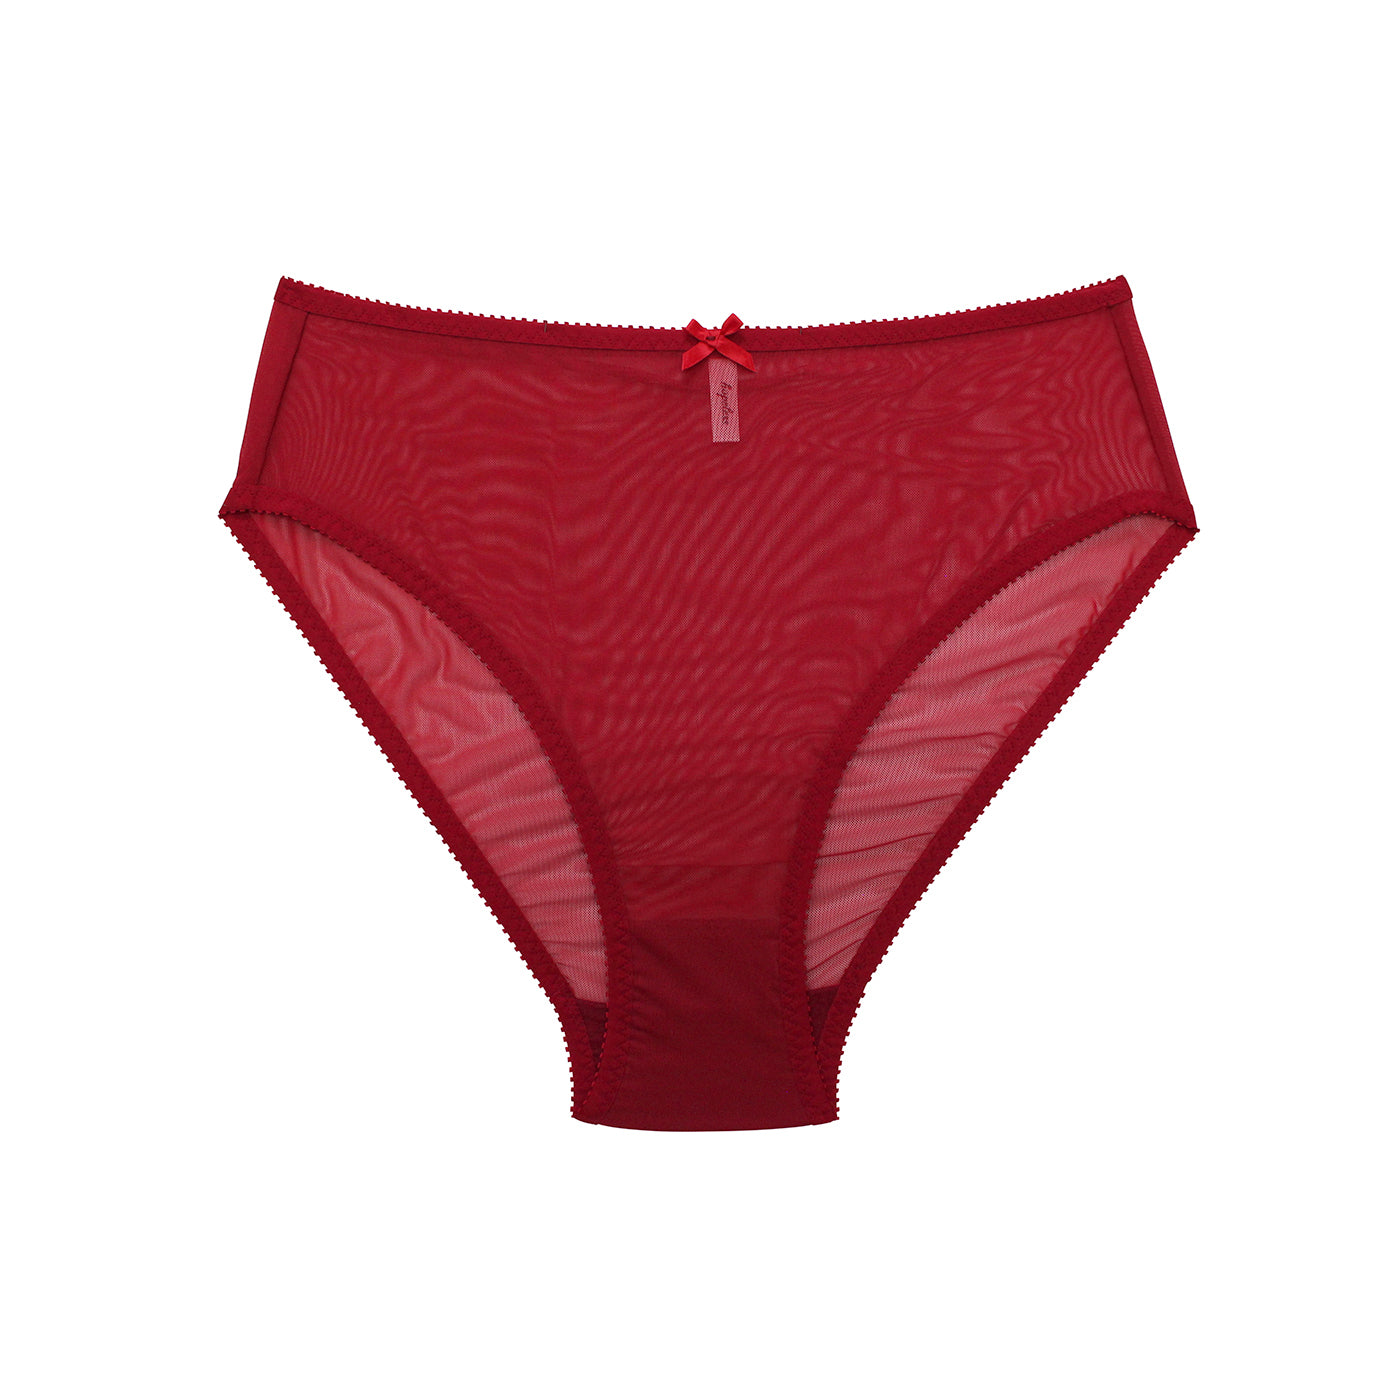 Underwear Panties G-String Thongs Briefs Lingerie Lace Knickers Women's  Plus Size Lingerie Set (Red, One Size)